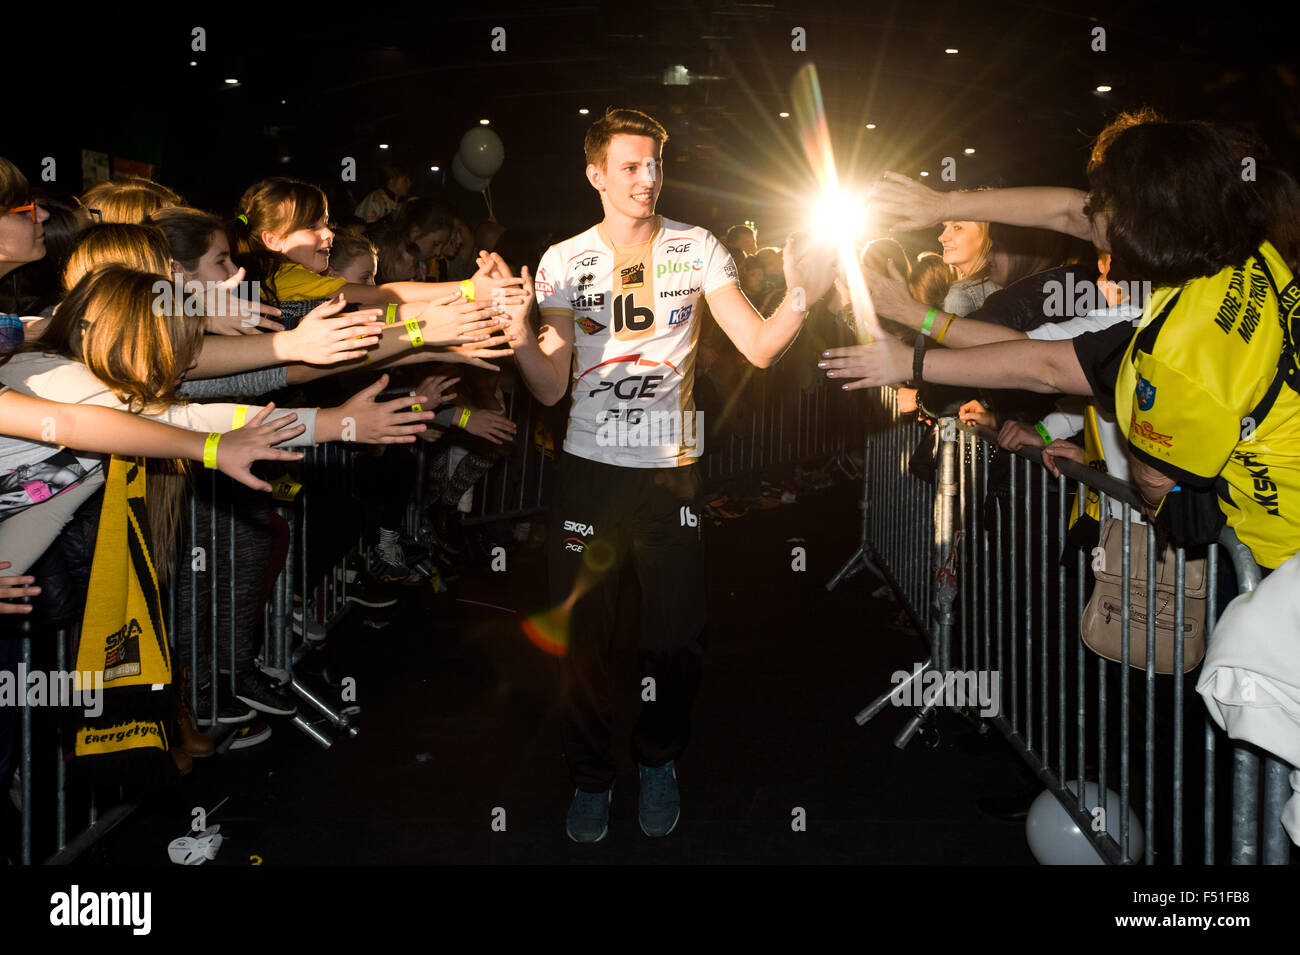 Belchatow, Poland. 25th Oct, 2015. Kacper Piechocki, welcomed by his fans, during official presentation of PGE Skra Belchatow team for 2015/2016 volleyball season. Credit:  Marcin Rozpedowski/Alamy Live News Stock Photo